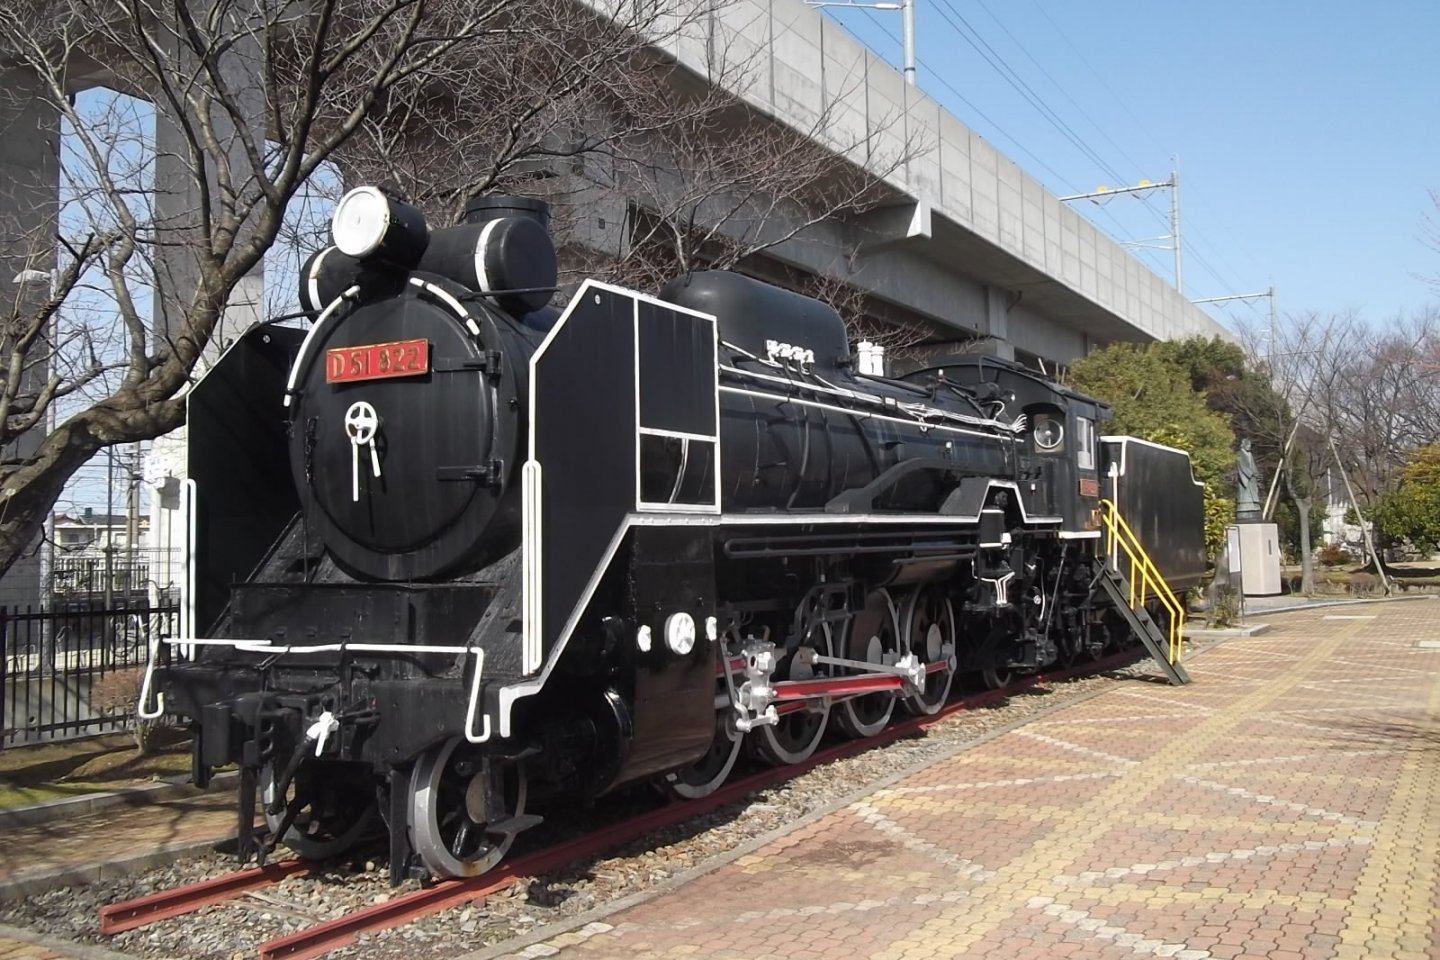 An old locomotive near the station